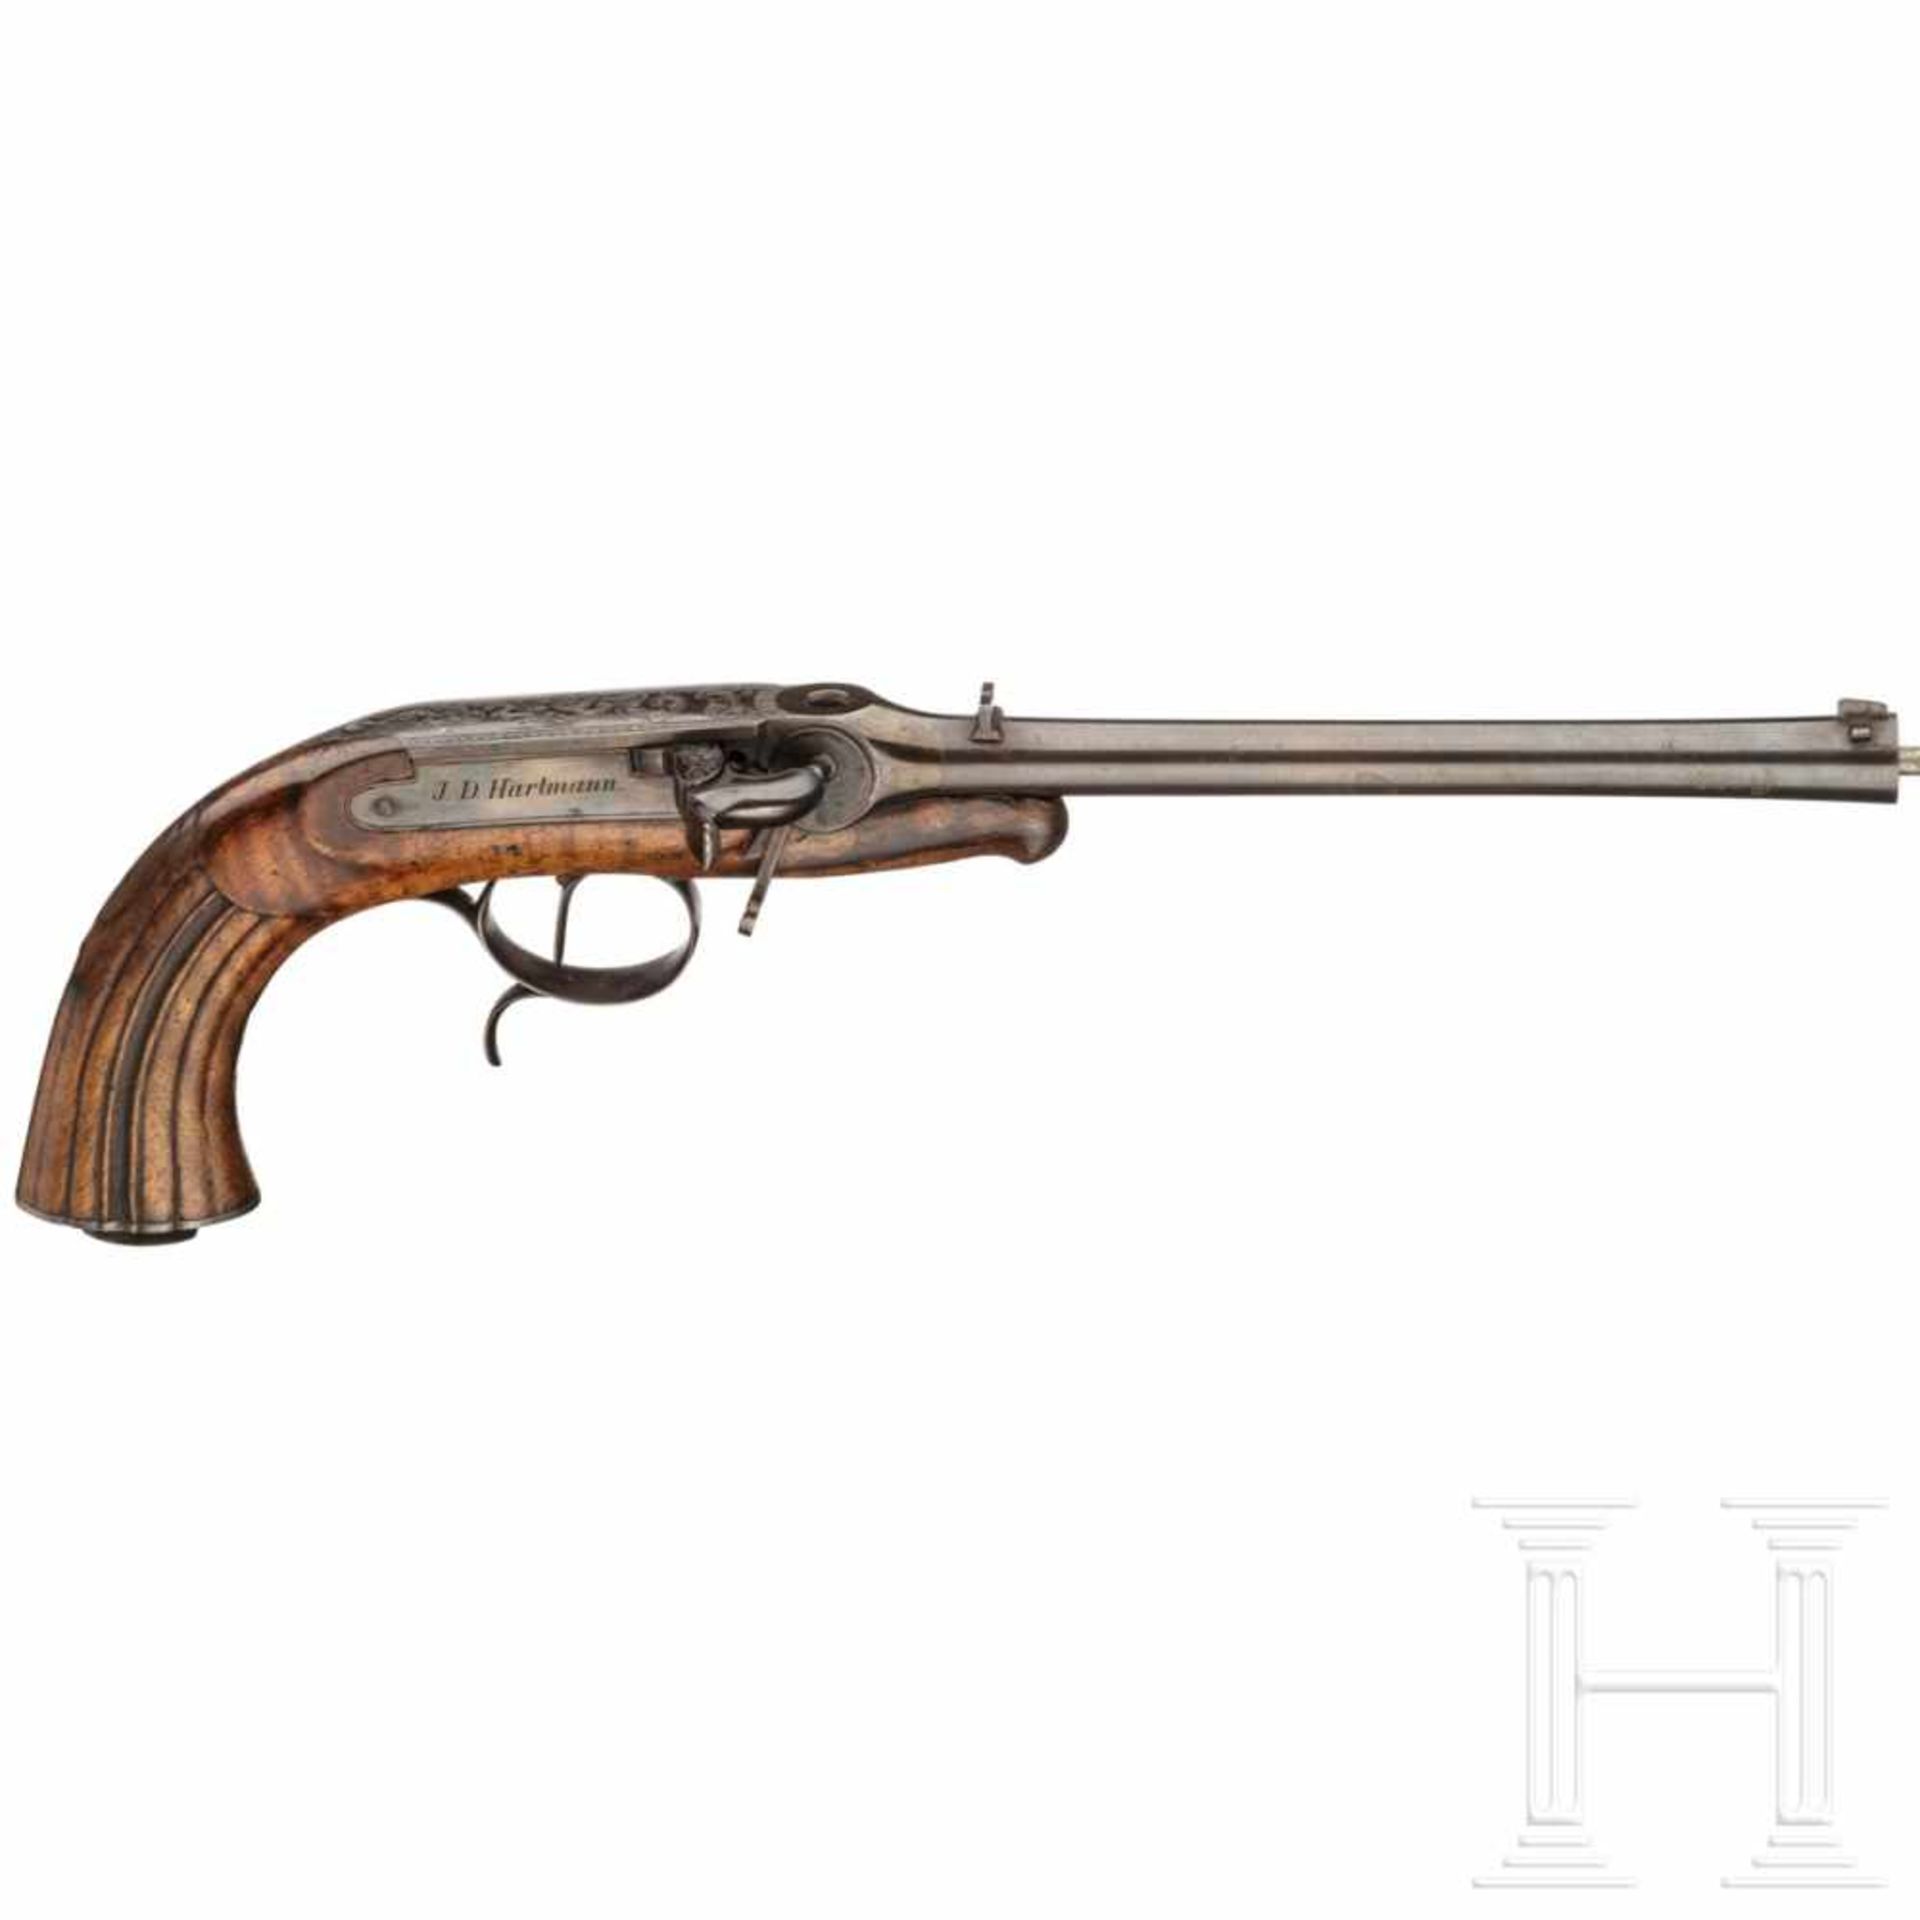 A percussion target pistol, J. D. Hartmann in Hamburg, ca. 1850Round barrel with smooth bore in